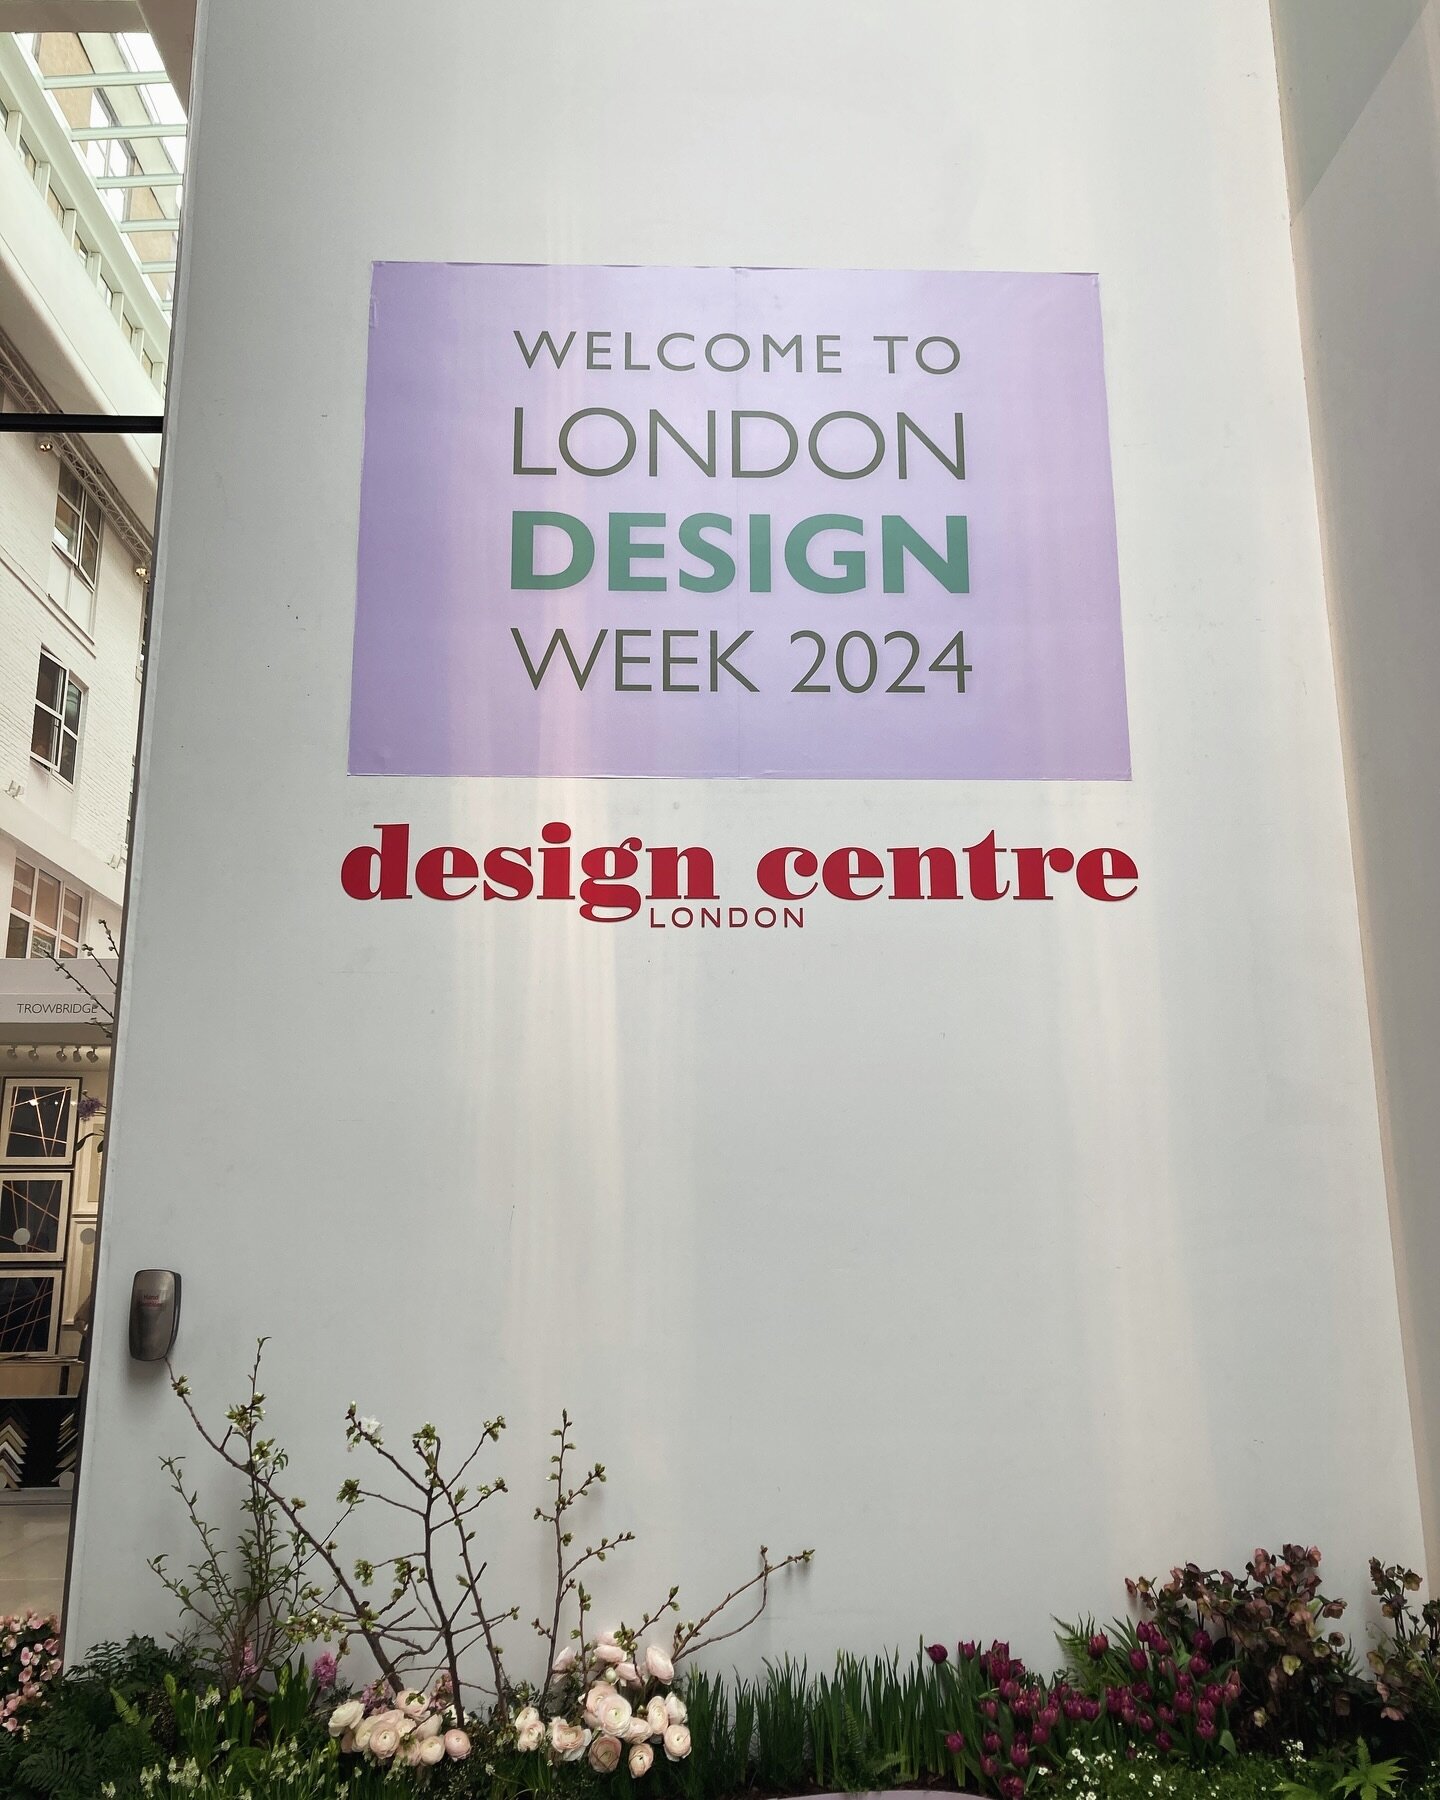 It&rsquo;s London Design Week 2024 so I spent the morning at Chelsea Harbour Design Centre learning all about high end fabrics and outdoor furniture. 

When it comes to the outdoors it really is but cheap buy twice as you need things to take a beatin